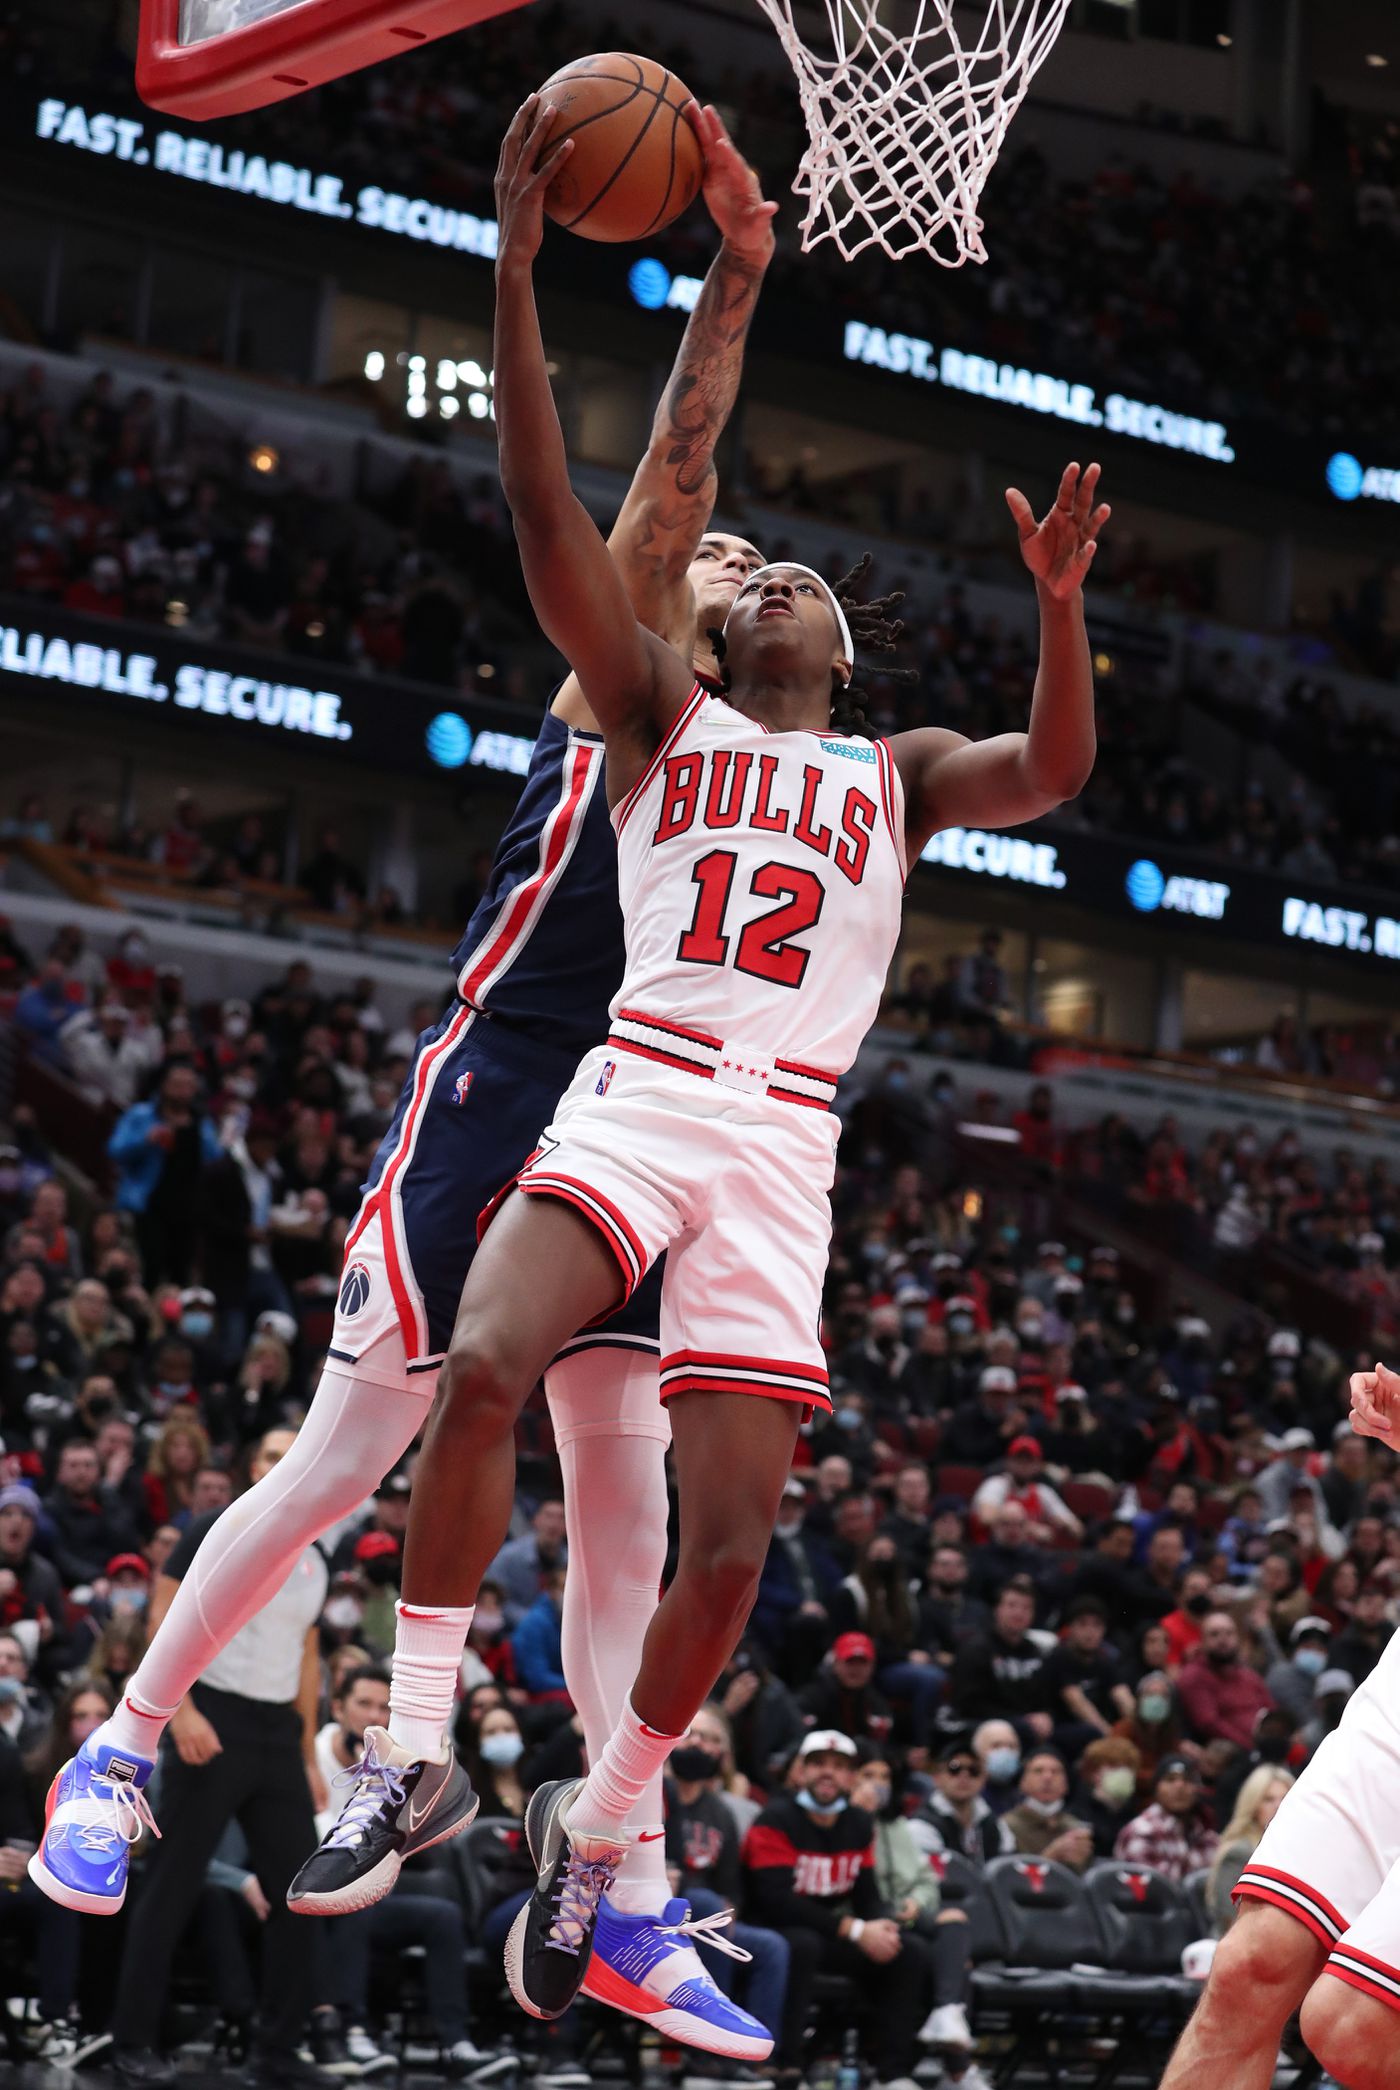 Chicago Bulls guard Ayo Dosunmu (12) is fouled by Washington Wizards forward Kyle Kuzma (33) during a basket attempt in the first quarter at United Center on Jan. 7, 2022, in Chicago.